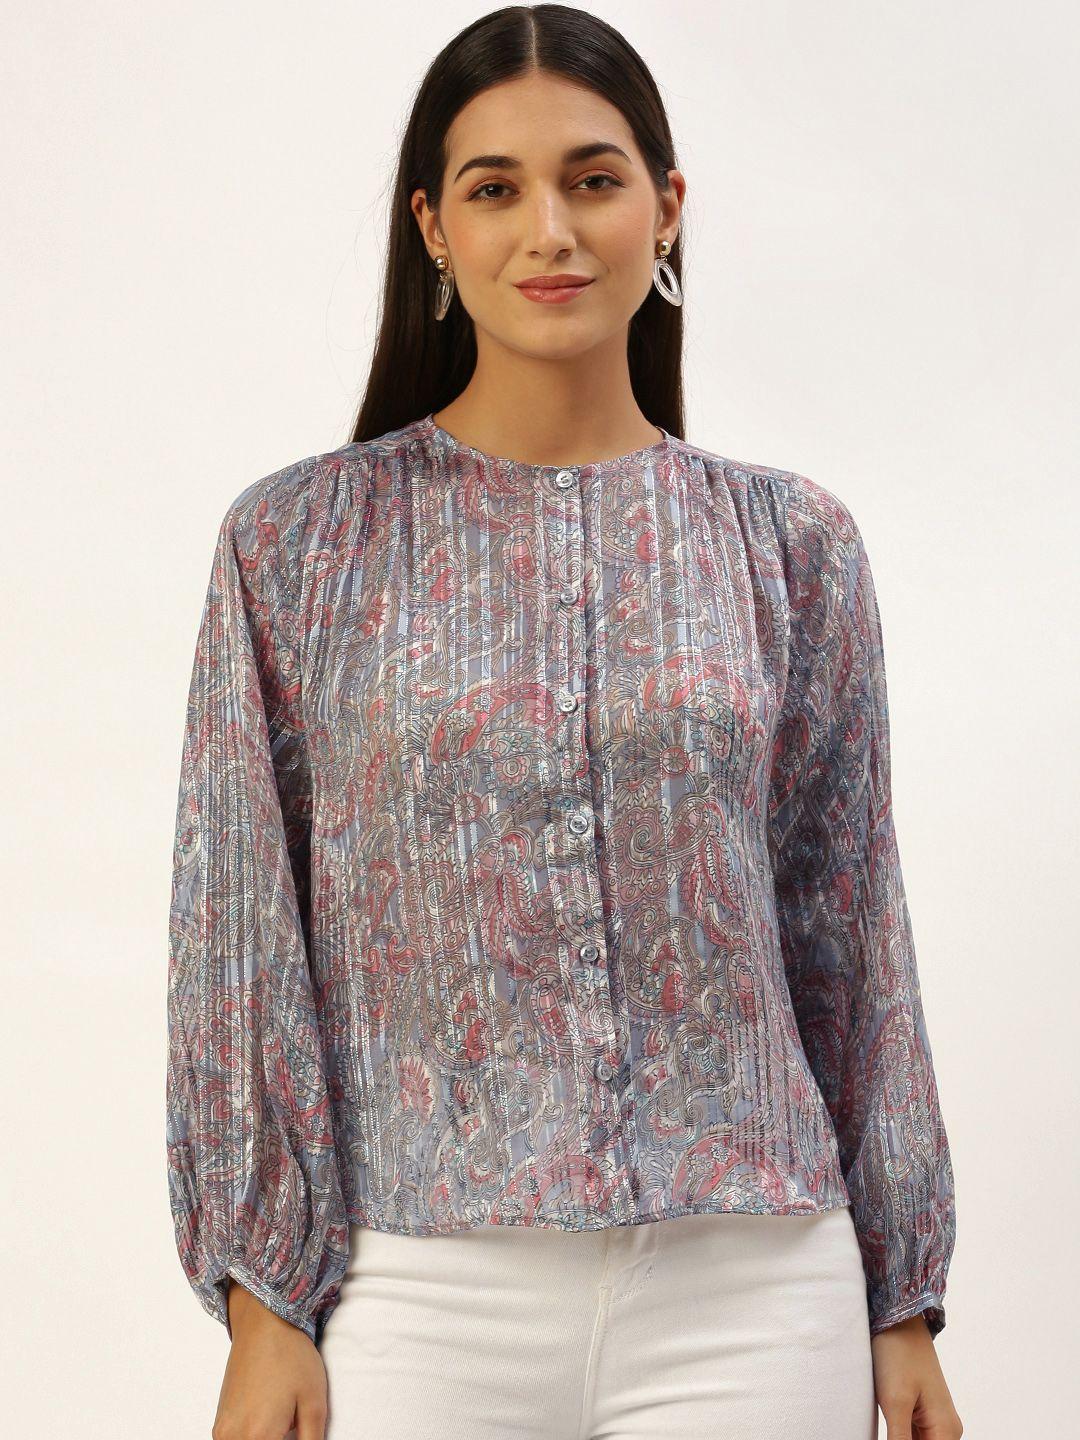 roving-mode-ethnic-motifs-print-georgette-shirt-style-top